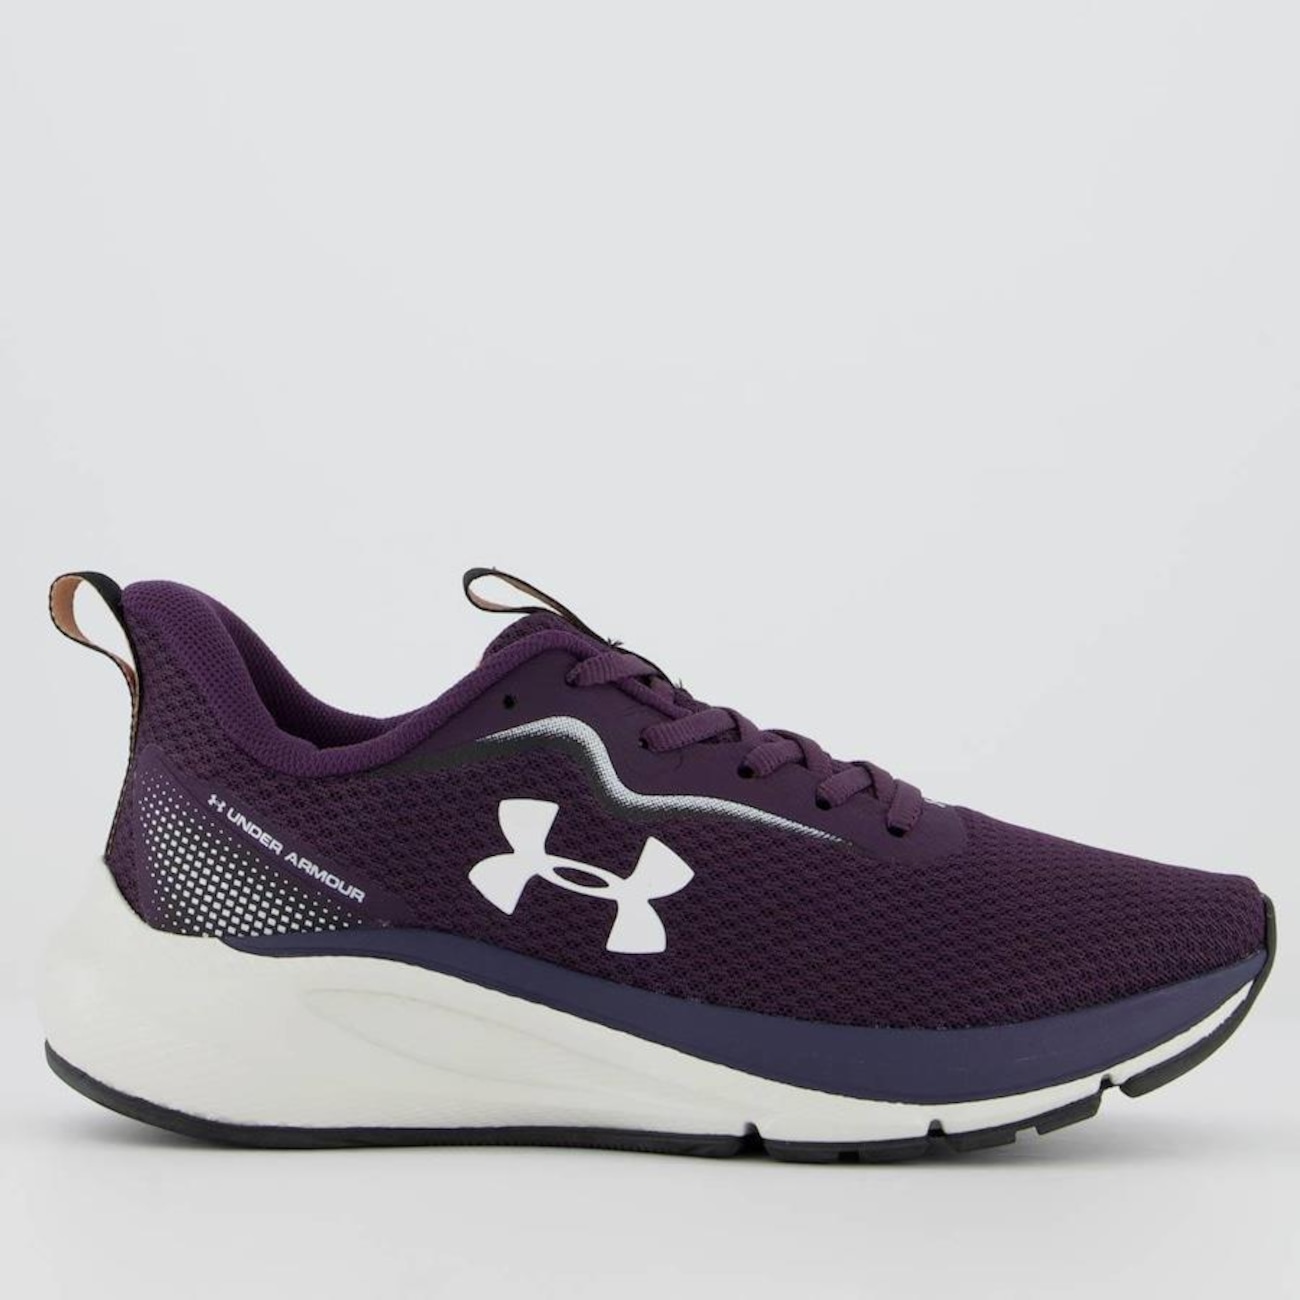 Tênis Under Armour Charged First - Feminino